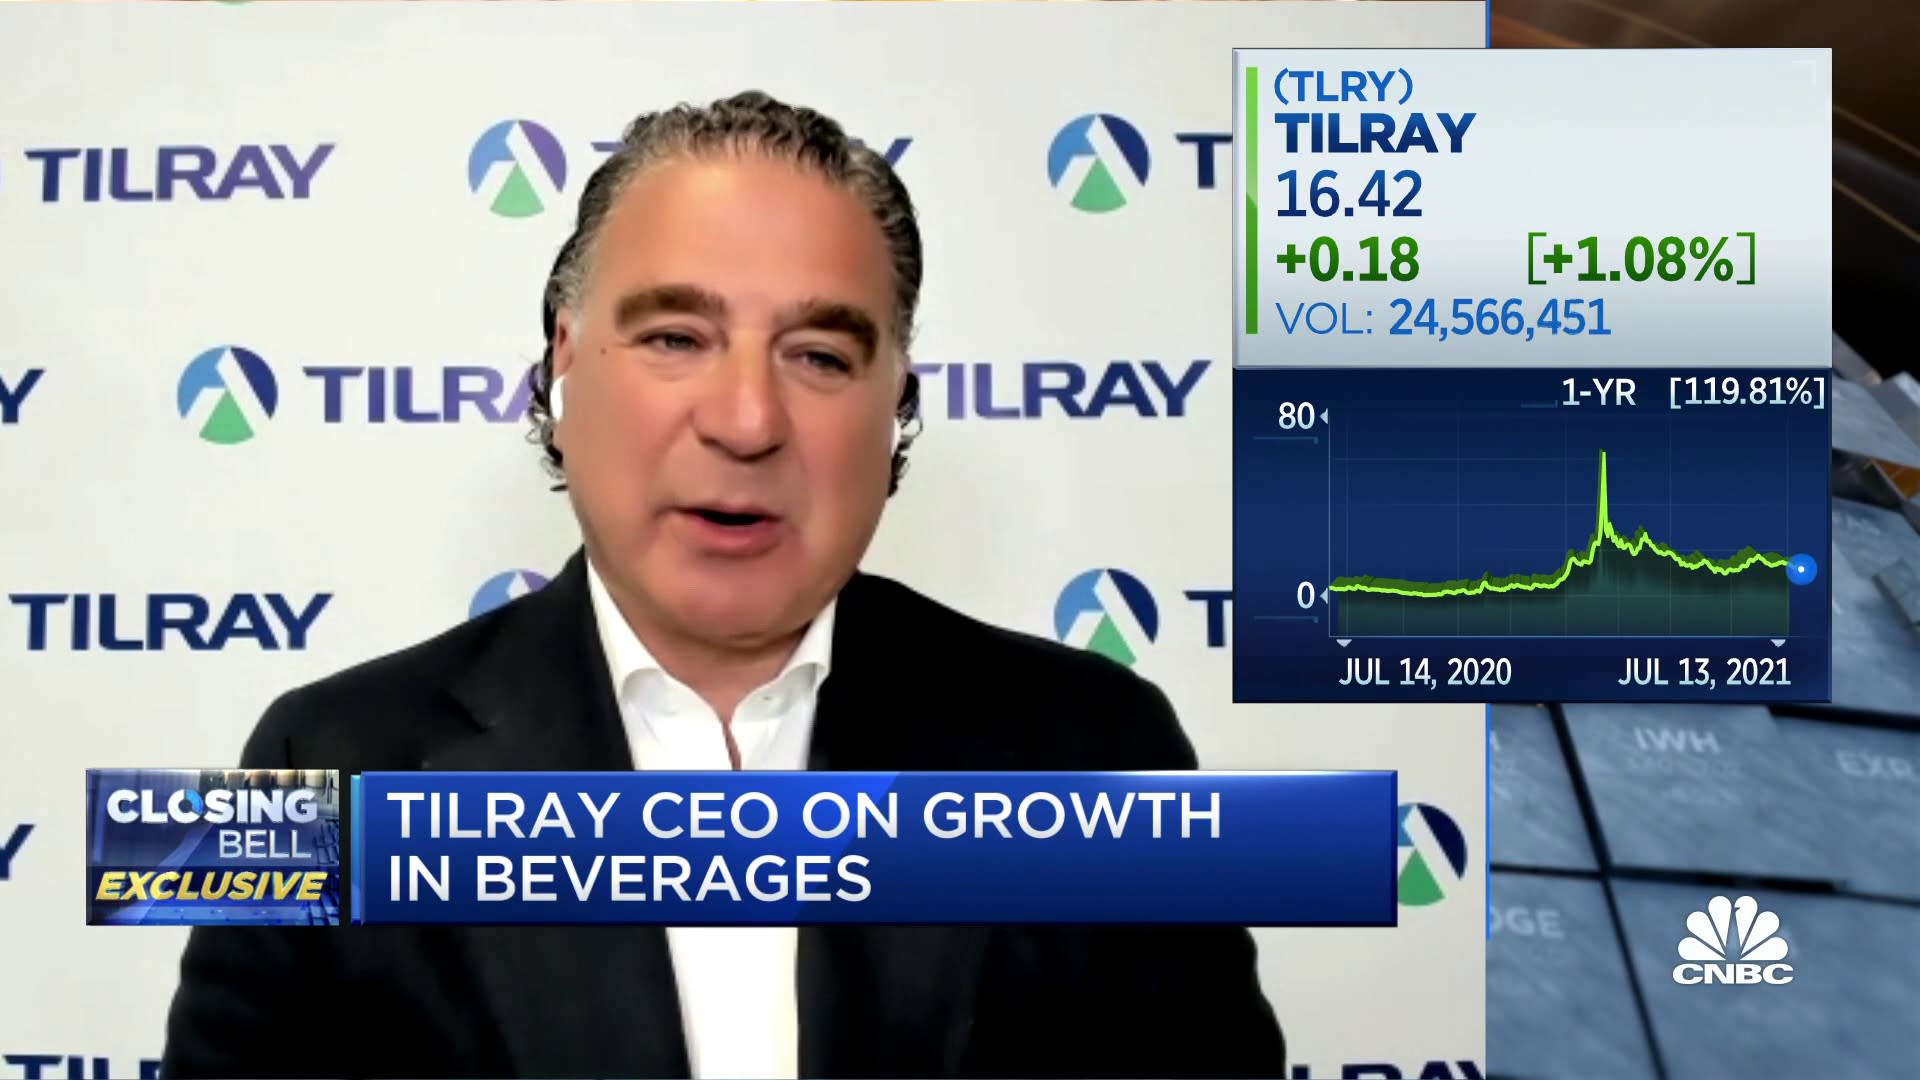 Tilray CEO Irwin Simon on potential for growth in CBD/THC beverages